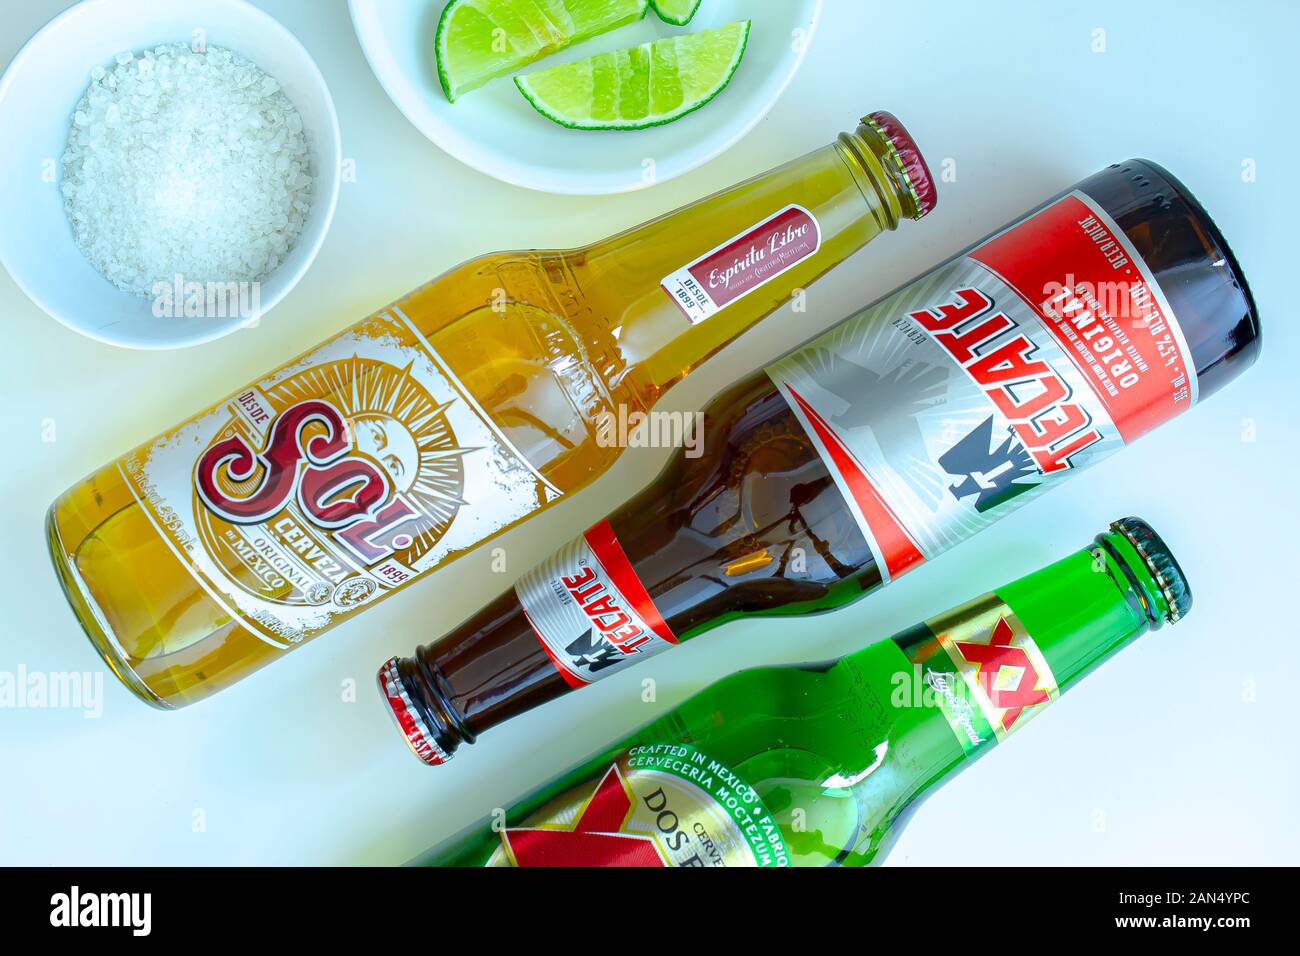 Bottles of Mexican pale and dark lager beers call: Sol, Tecate and Dos Equis on a white table with limes and salt on the side Stock Photo